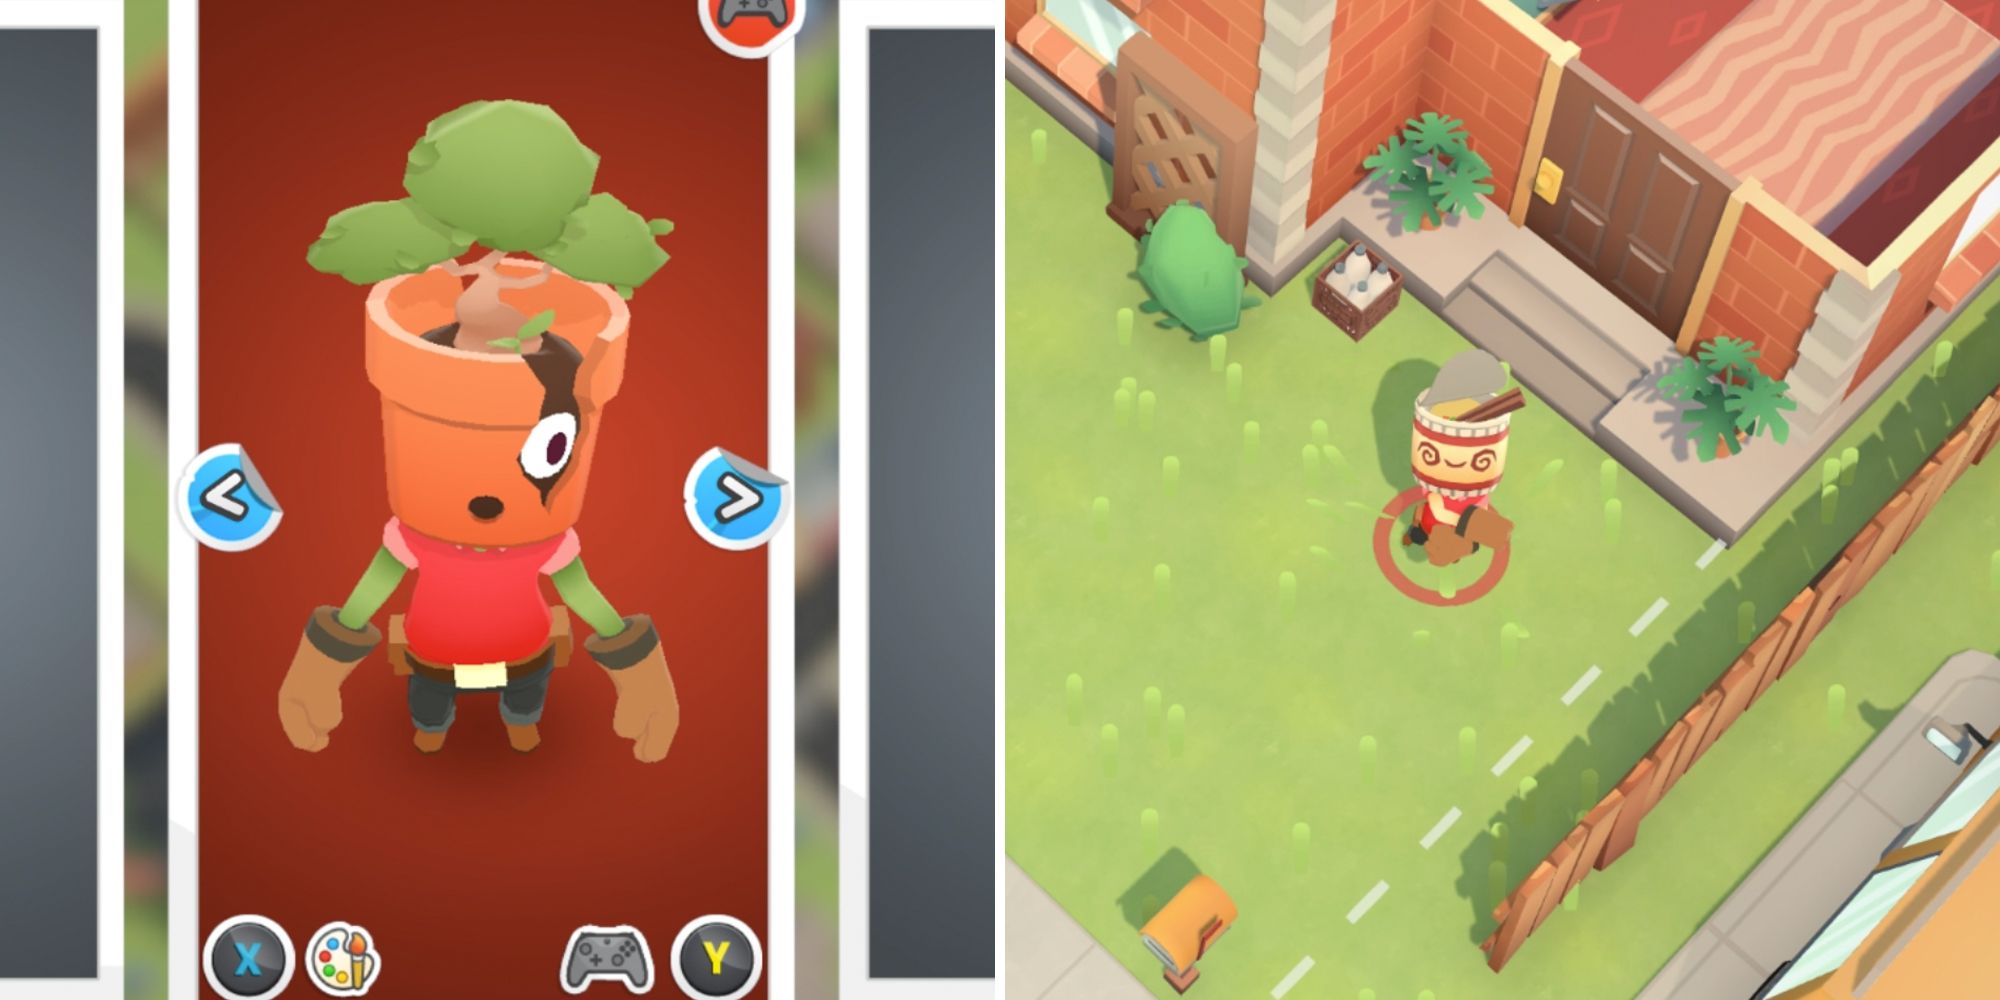 moving out split image. tree pot character on left.